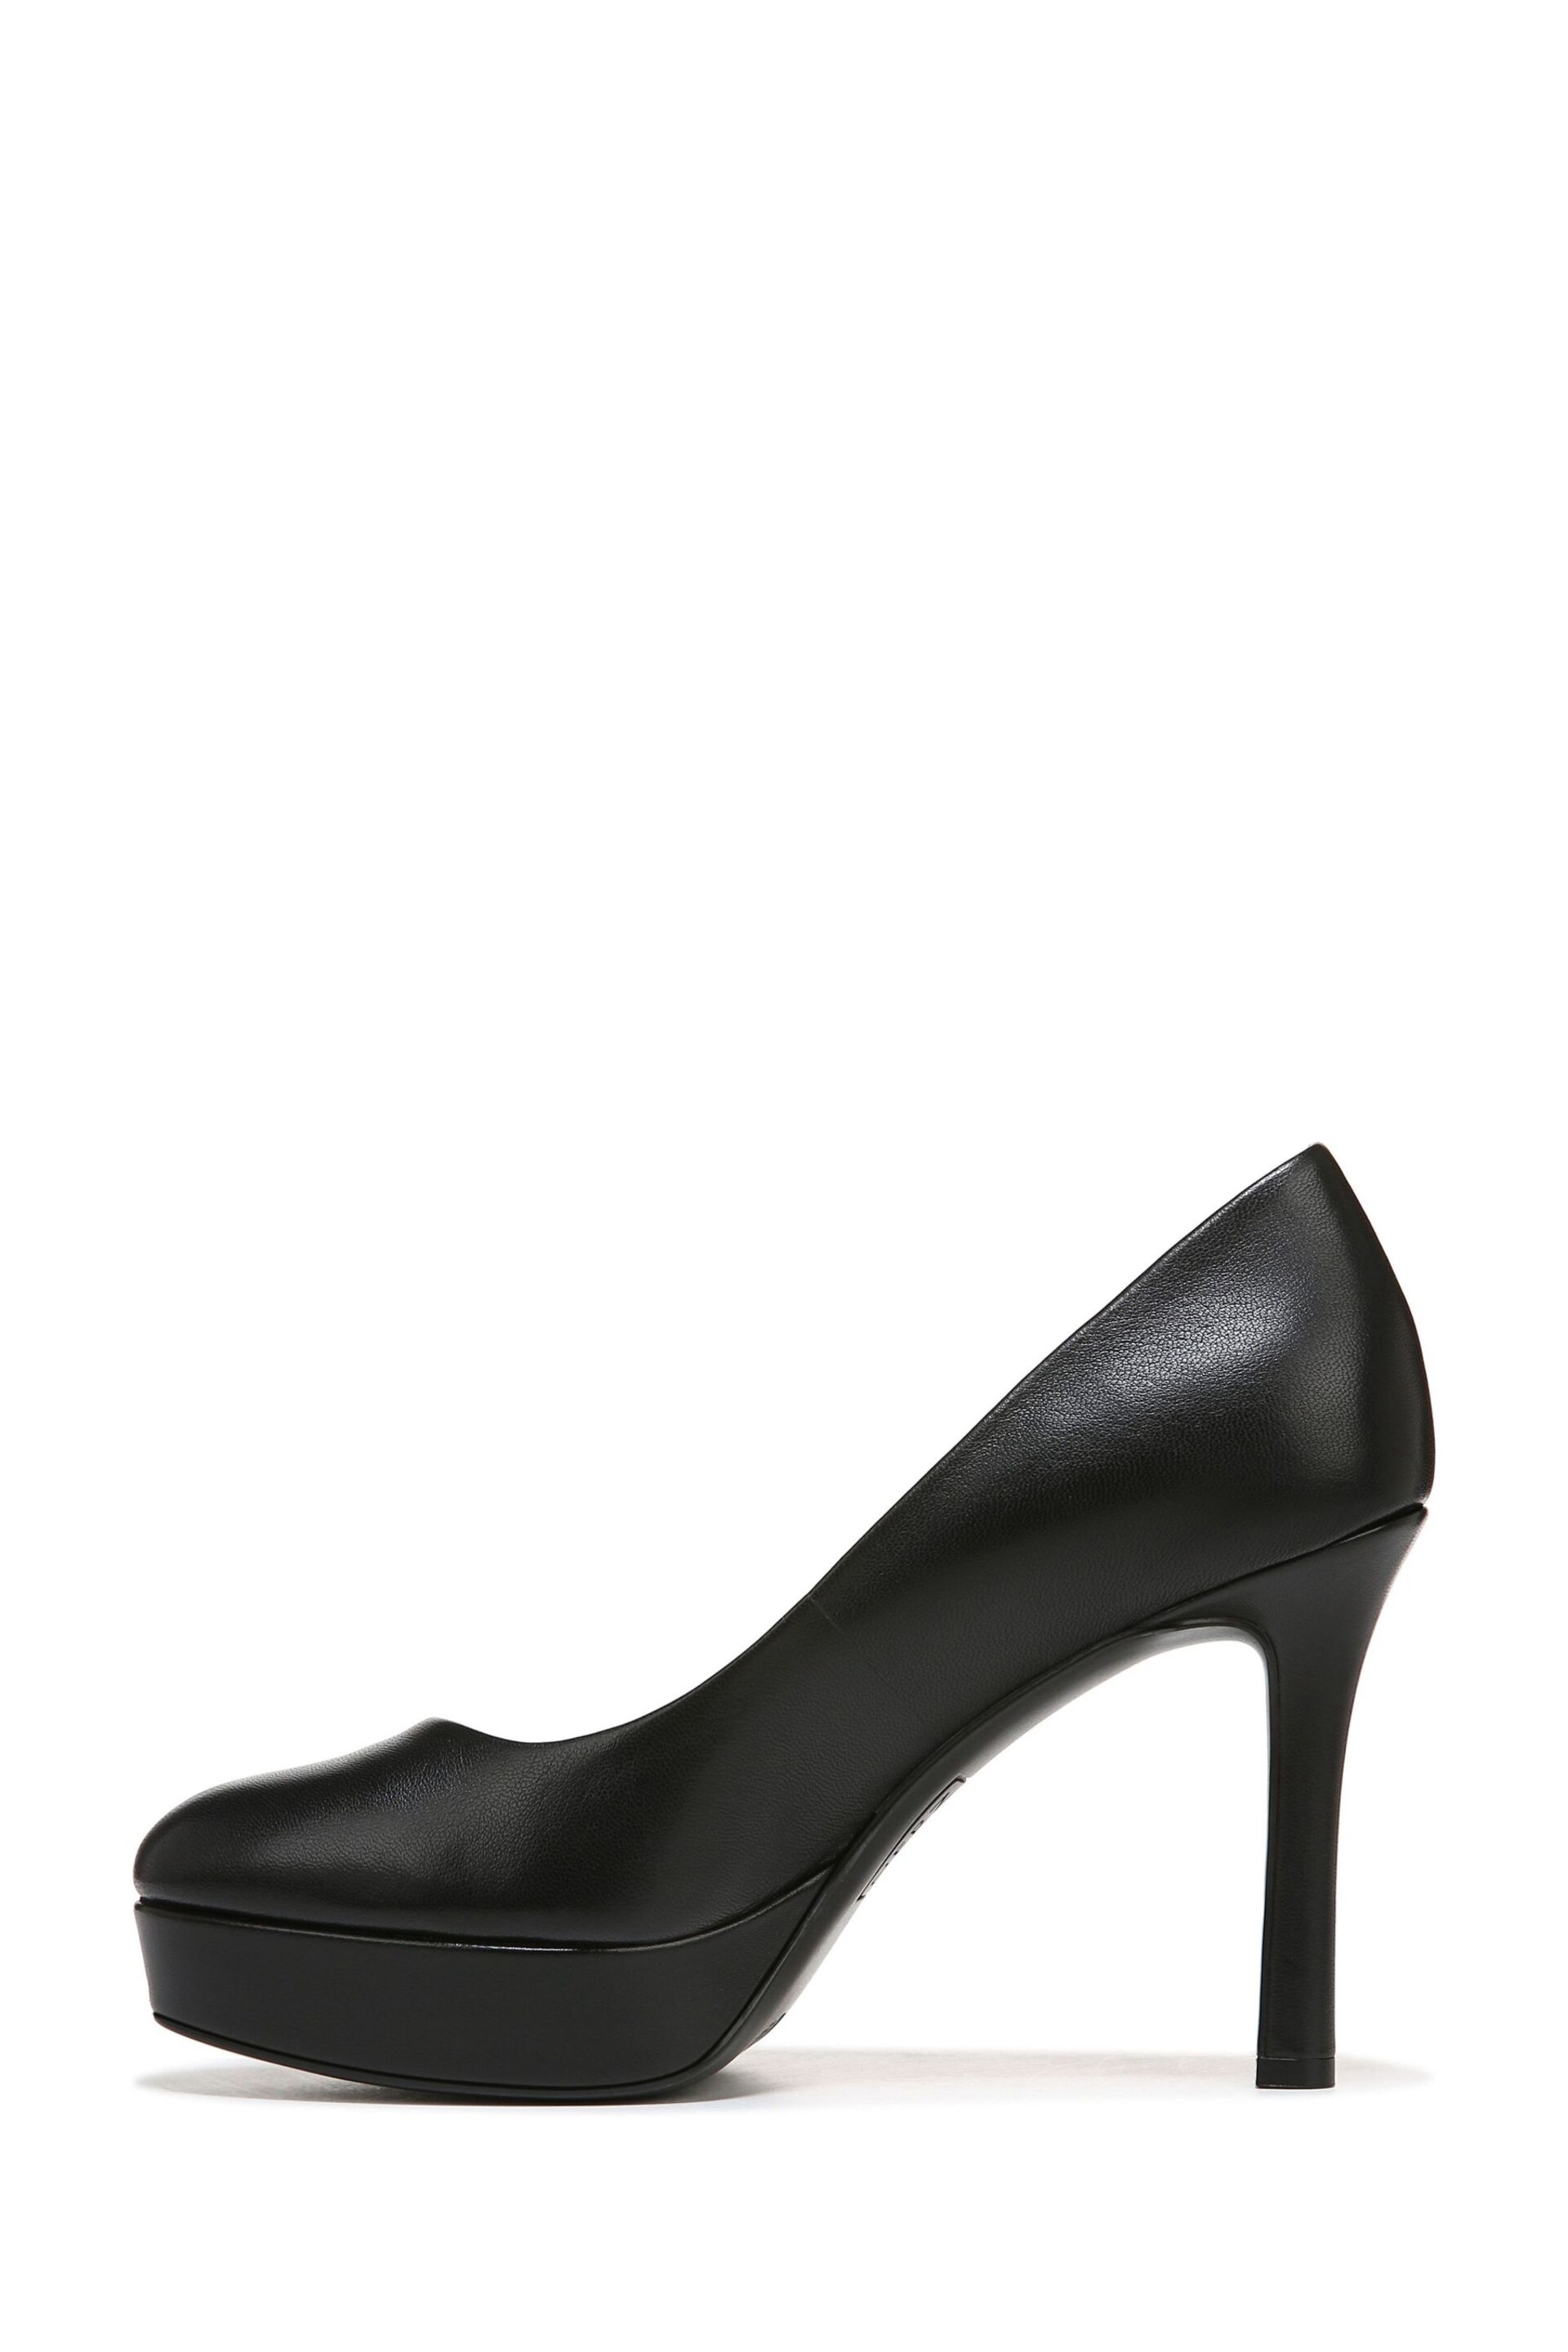 Naturalizer Court Leather Black Shoes - Image 3 of 7